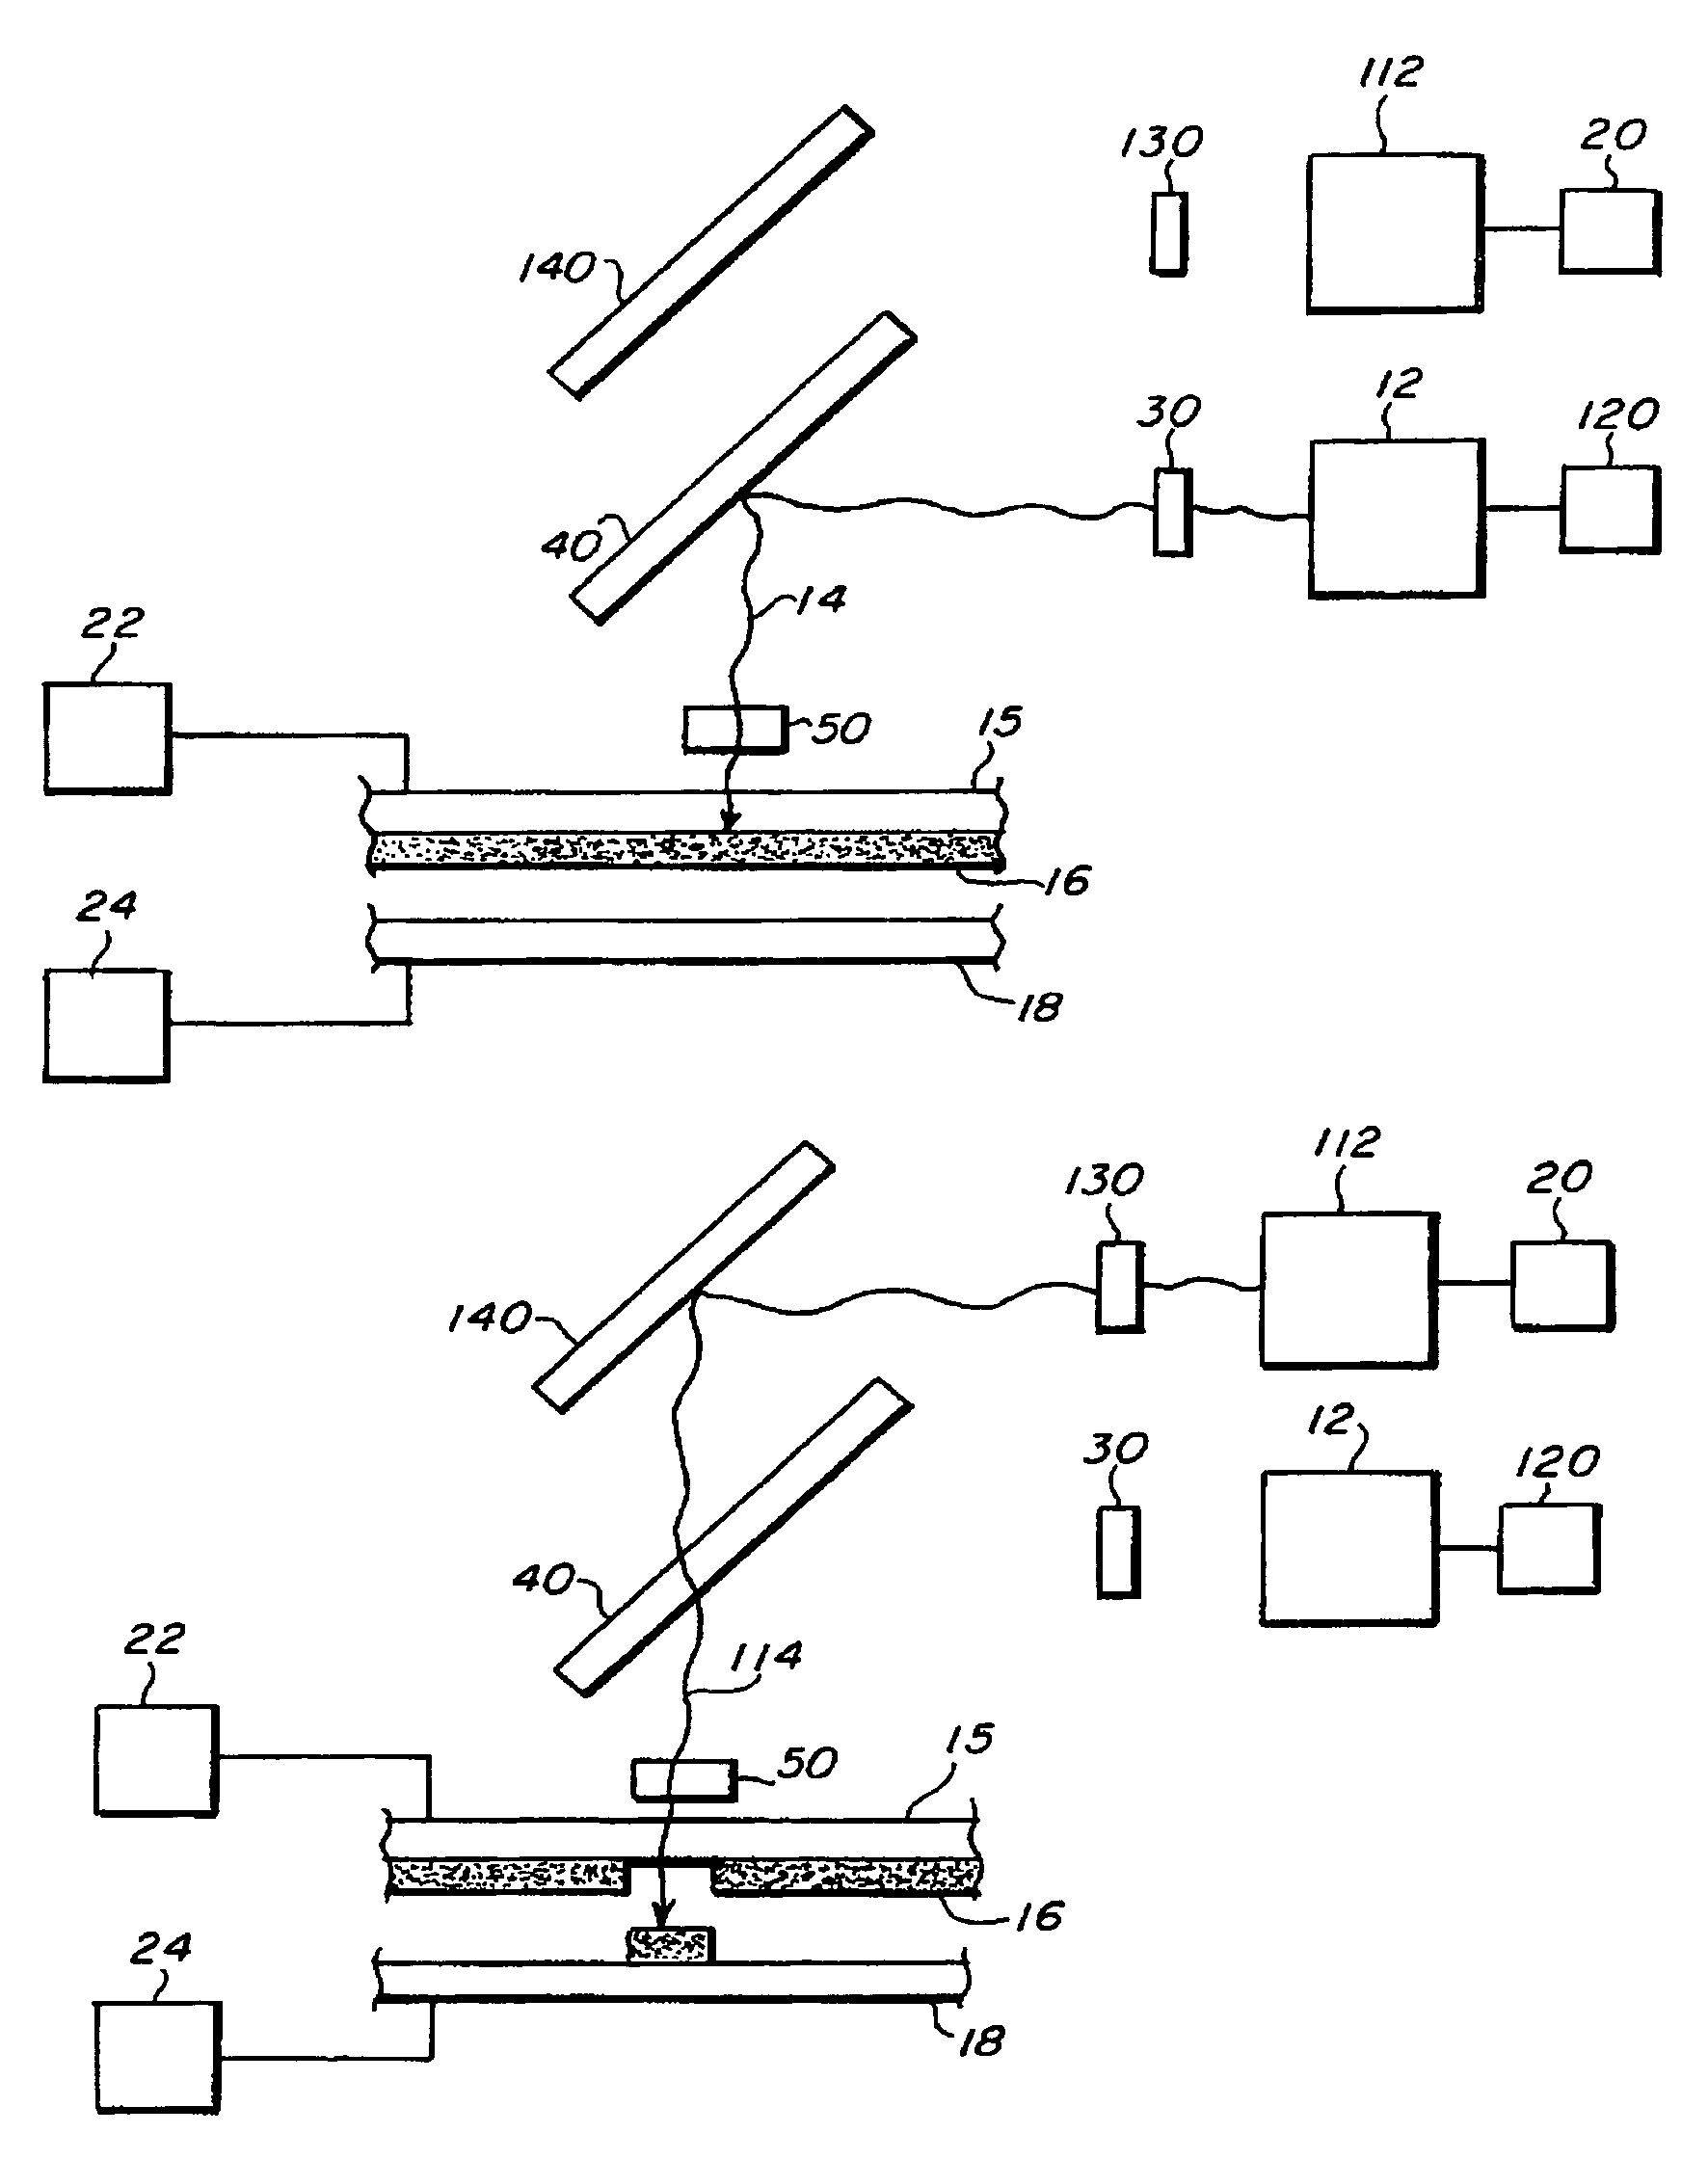 Direct-write laser transfer and processing